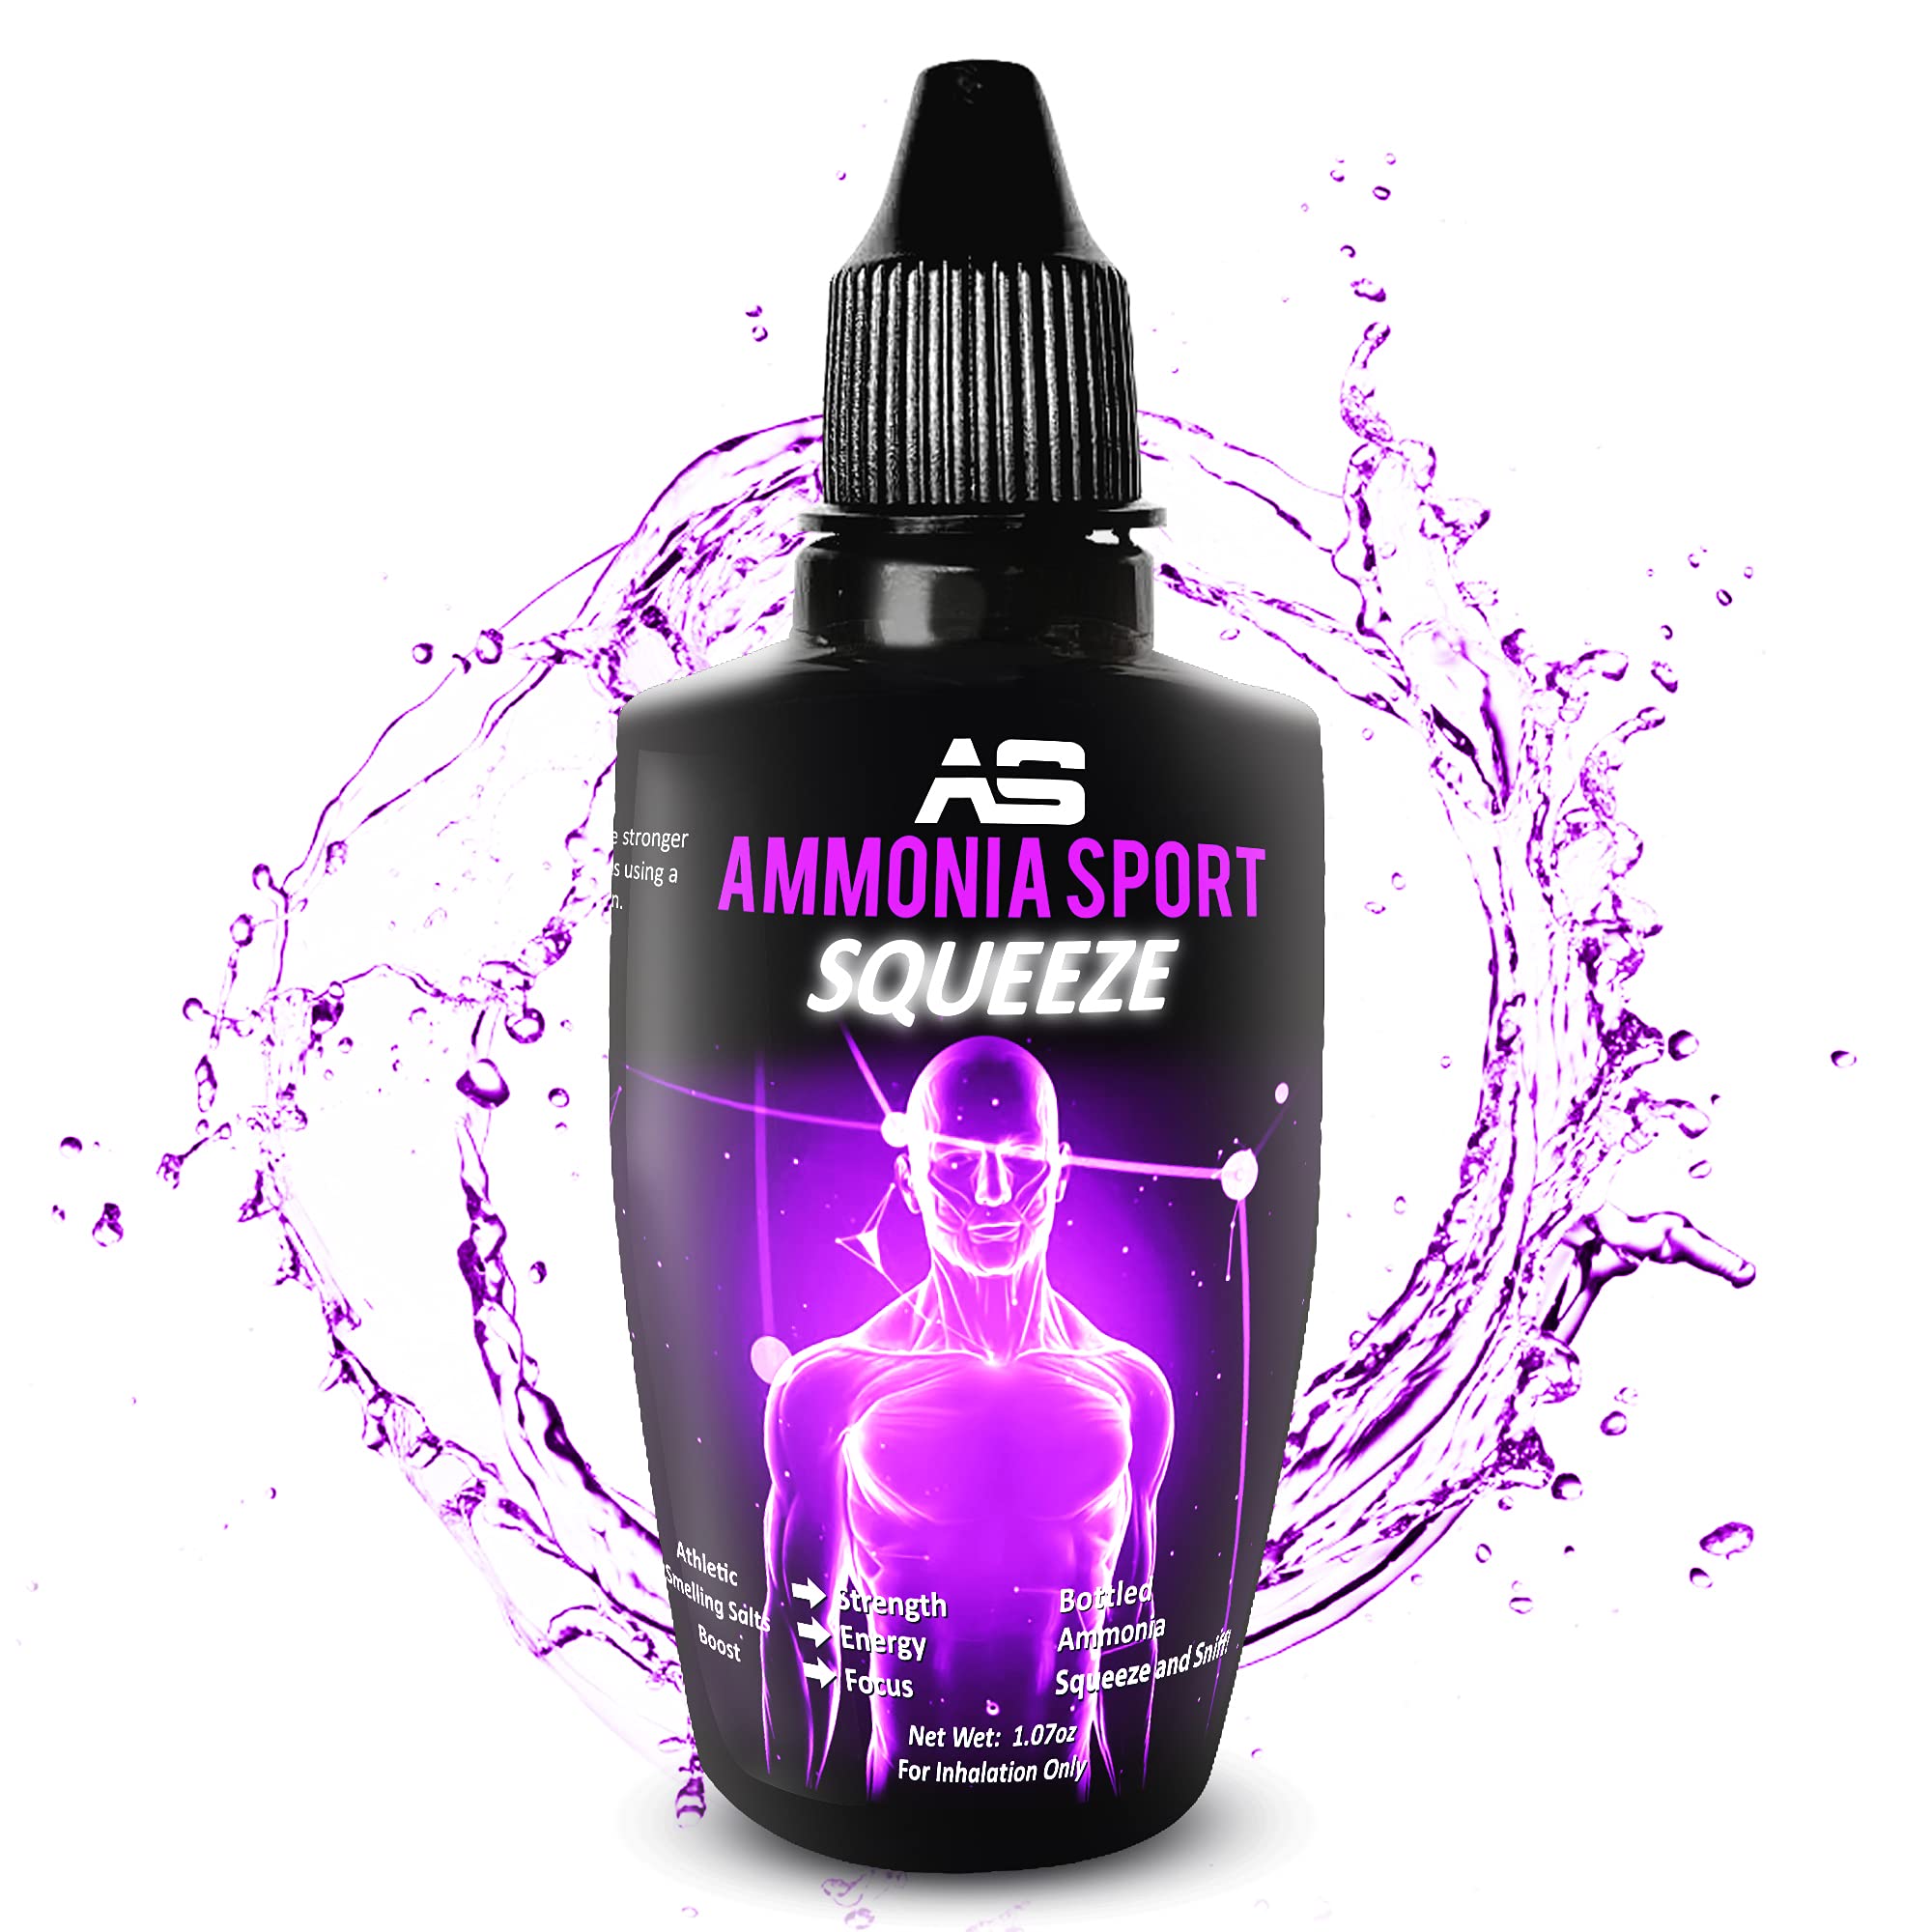 AmmoniaSport Smelling Salts for Athletes - RAW - Twist & Sniff! Wide Mouth,  Tall Bottle for Extra Strength - Pre-Activated Salt with Hundreds of Uses